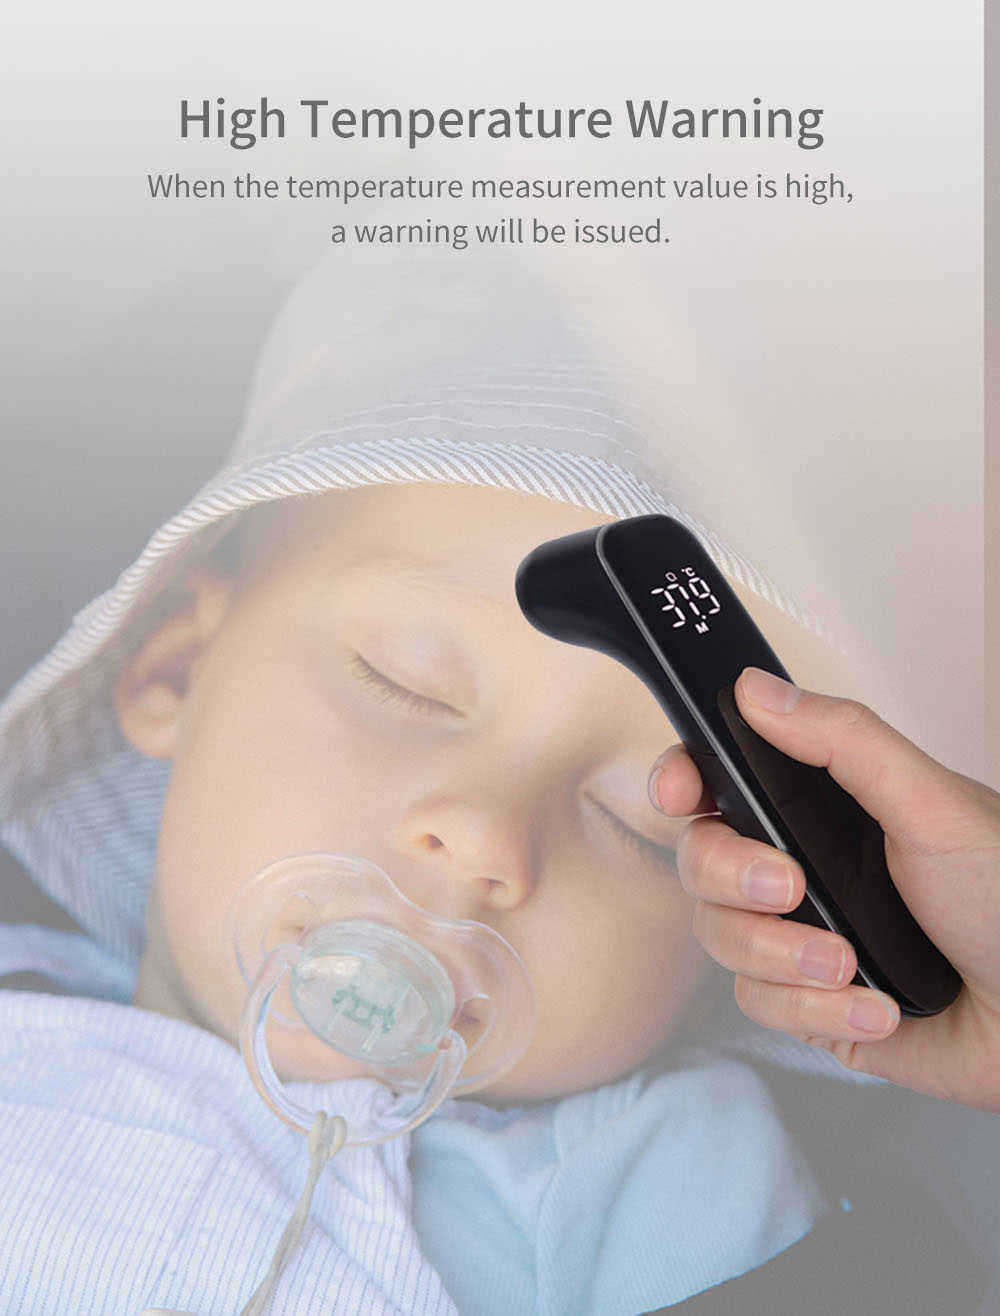 T09-LED-Full-Screen-Smart-Body-Thermometer-ordmF-1S-Instant-Measure-Infrared-Digital-Thermometer-Fro-1548850